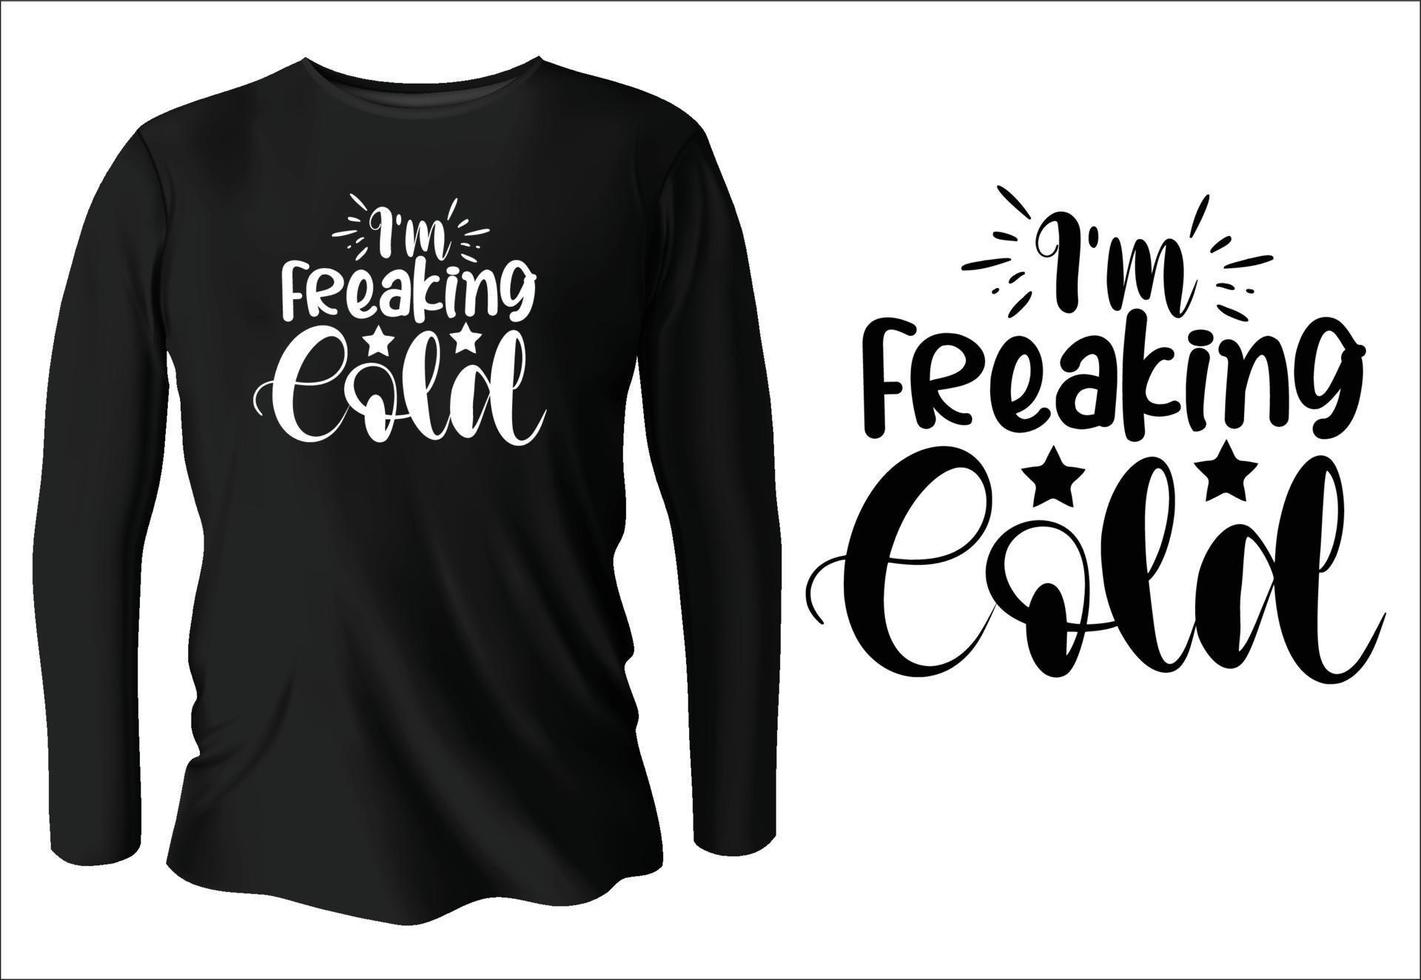 I'm freaking cold t-shirt design with vector